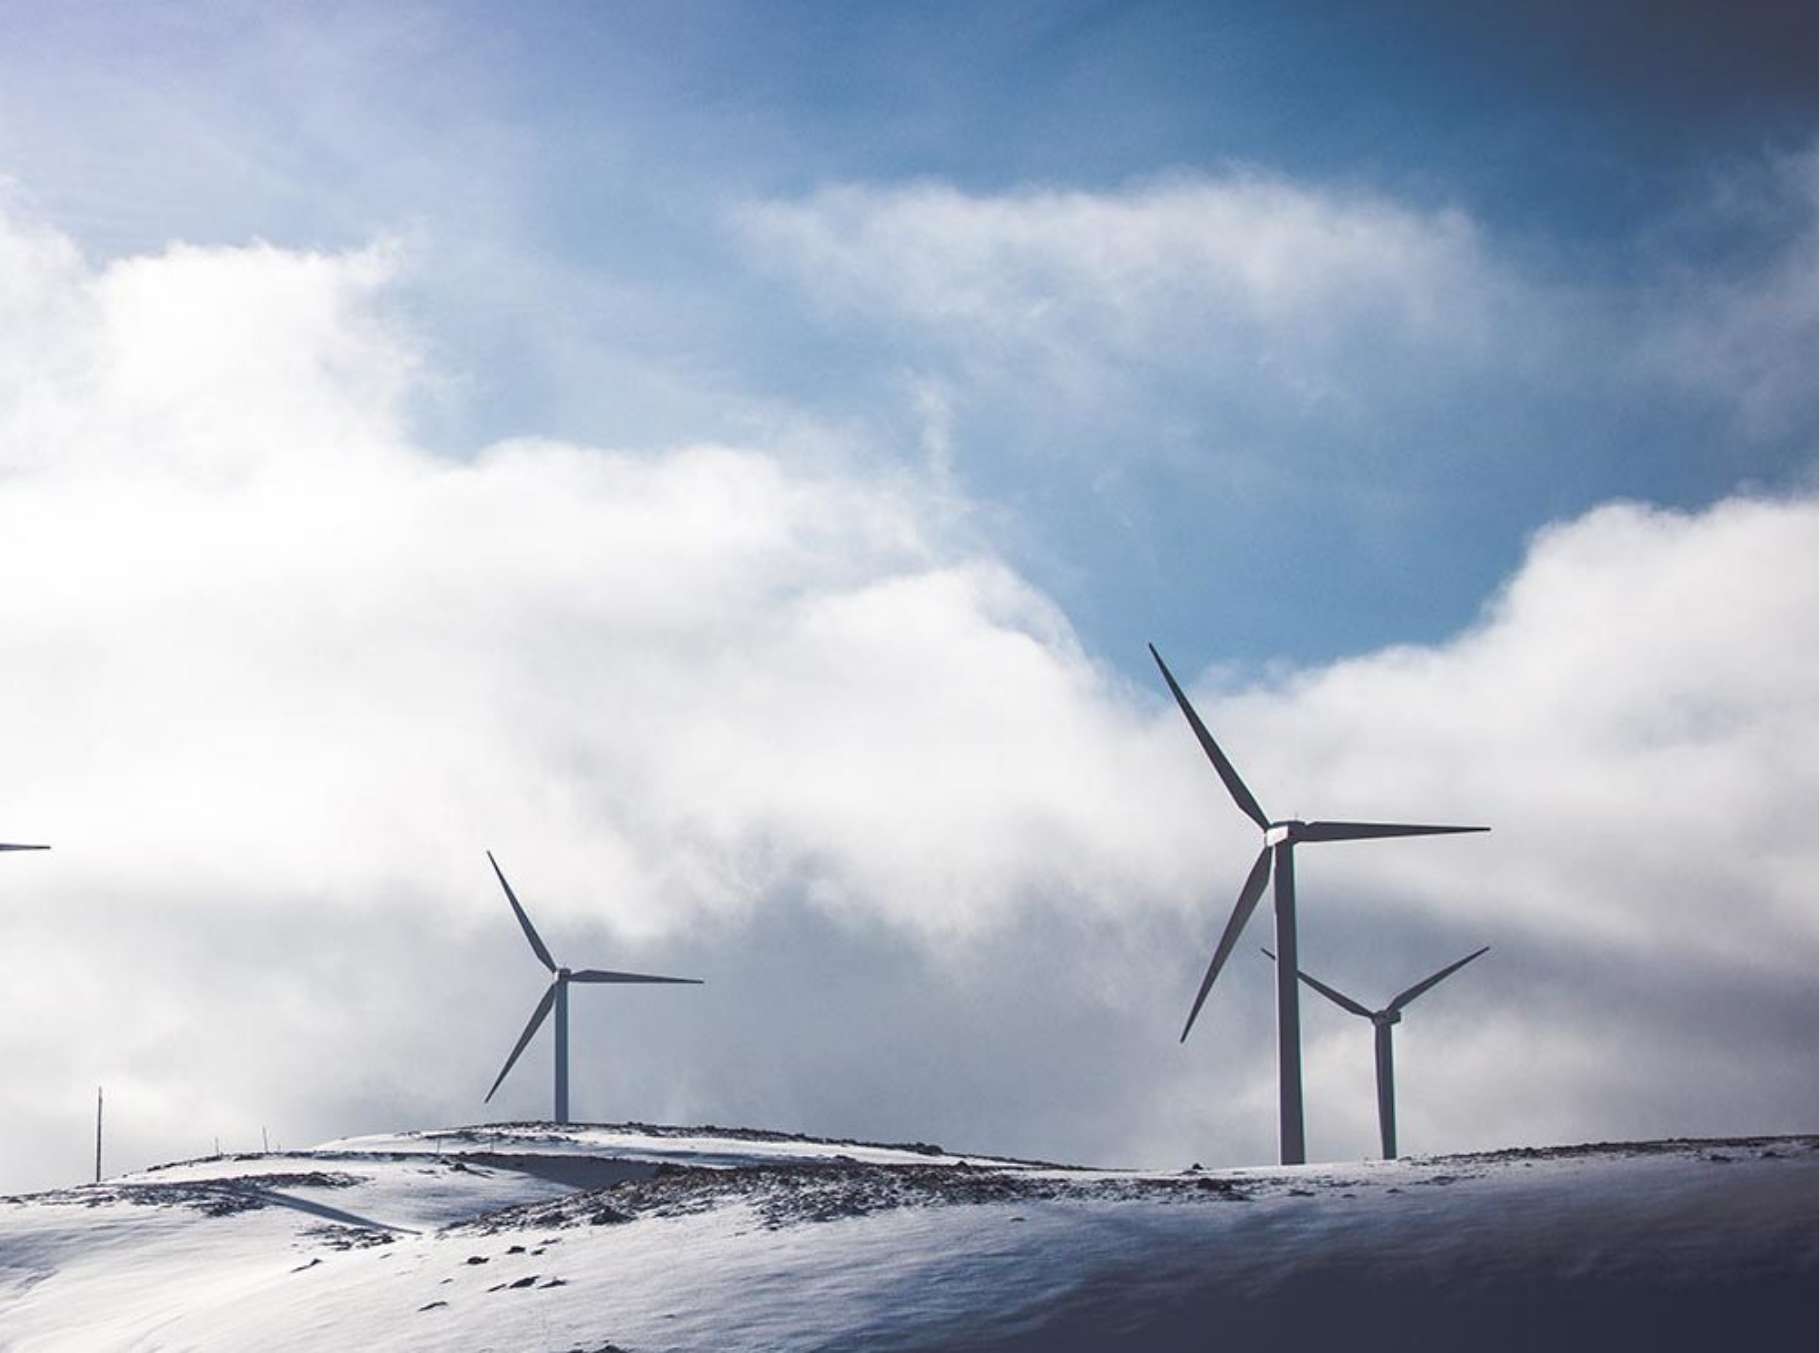 Photograph of windmills on a snowy hill